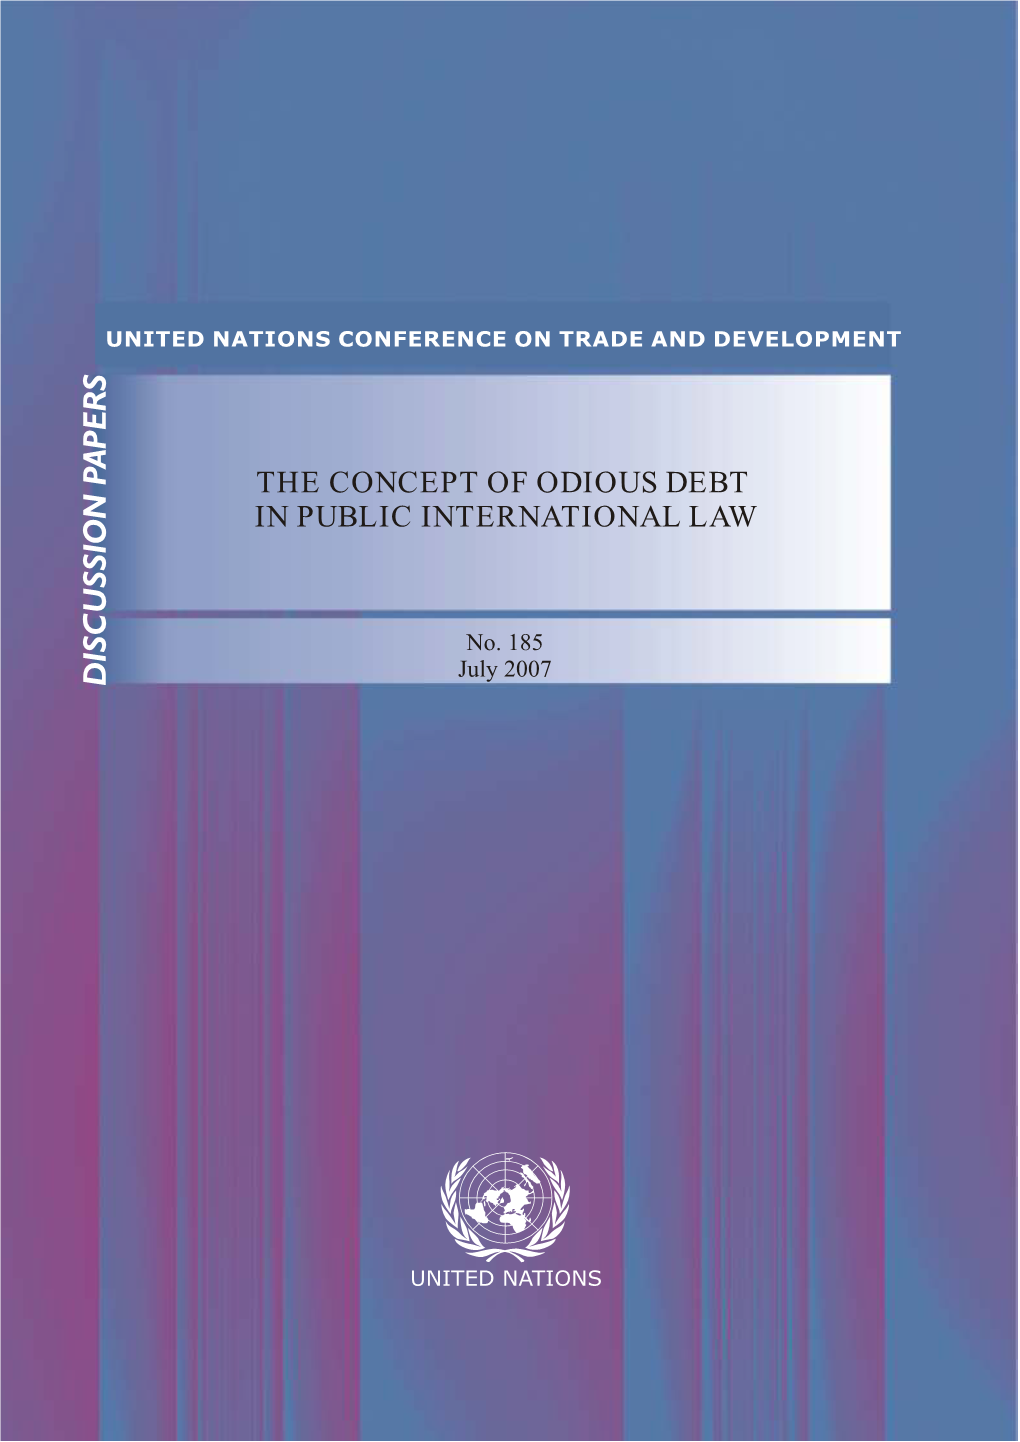 The Concept of Odious Debt in Public International Law